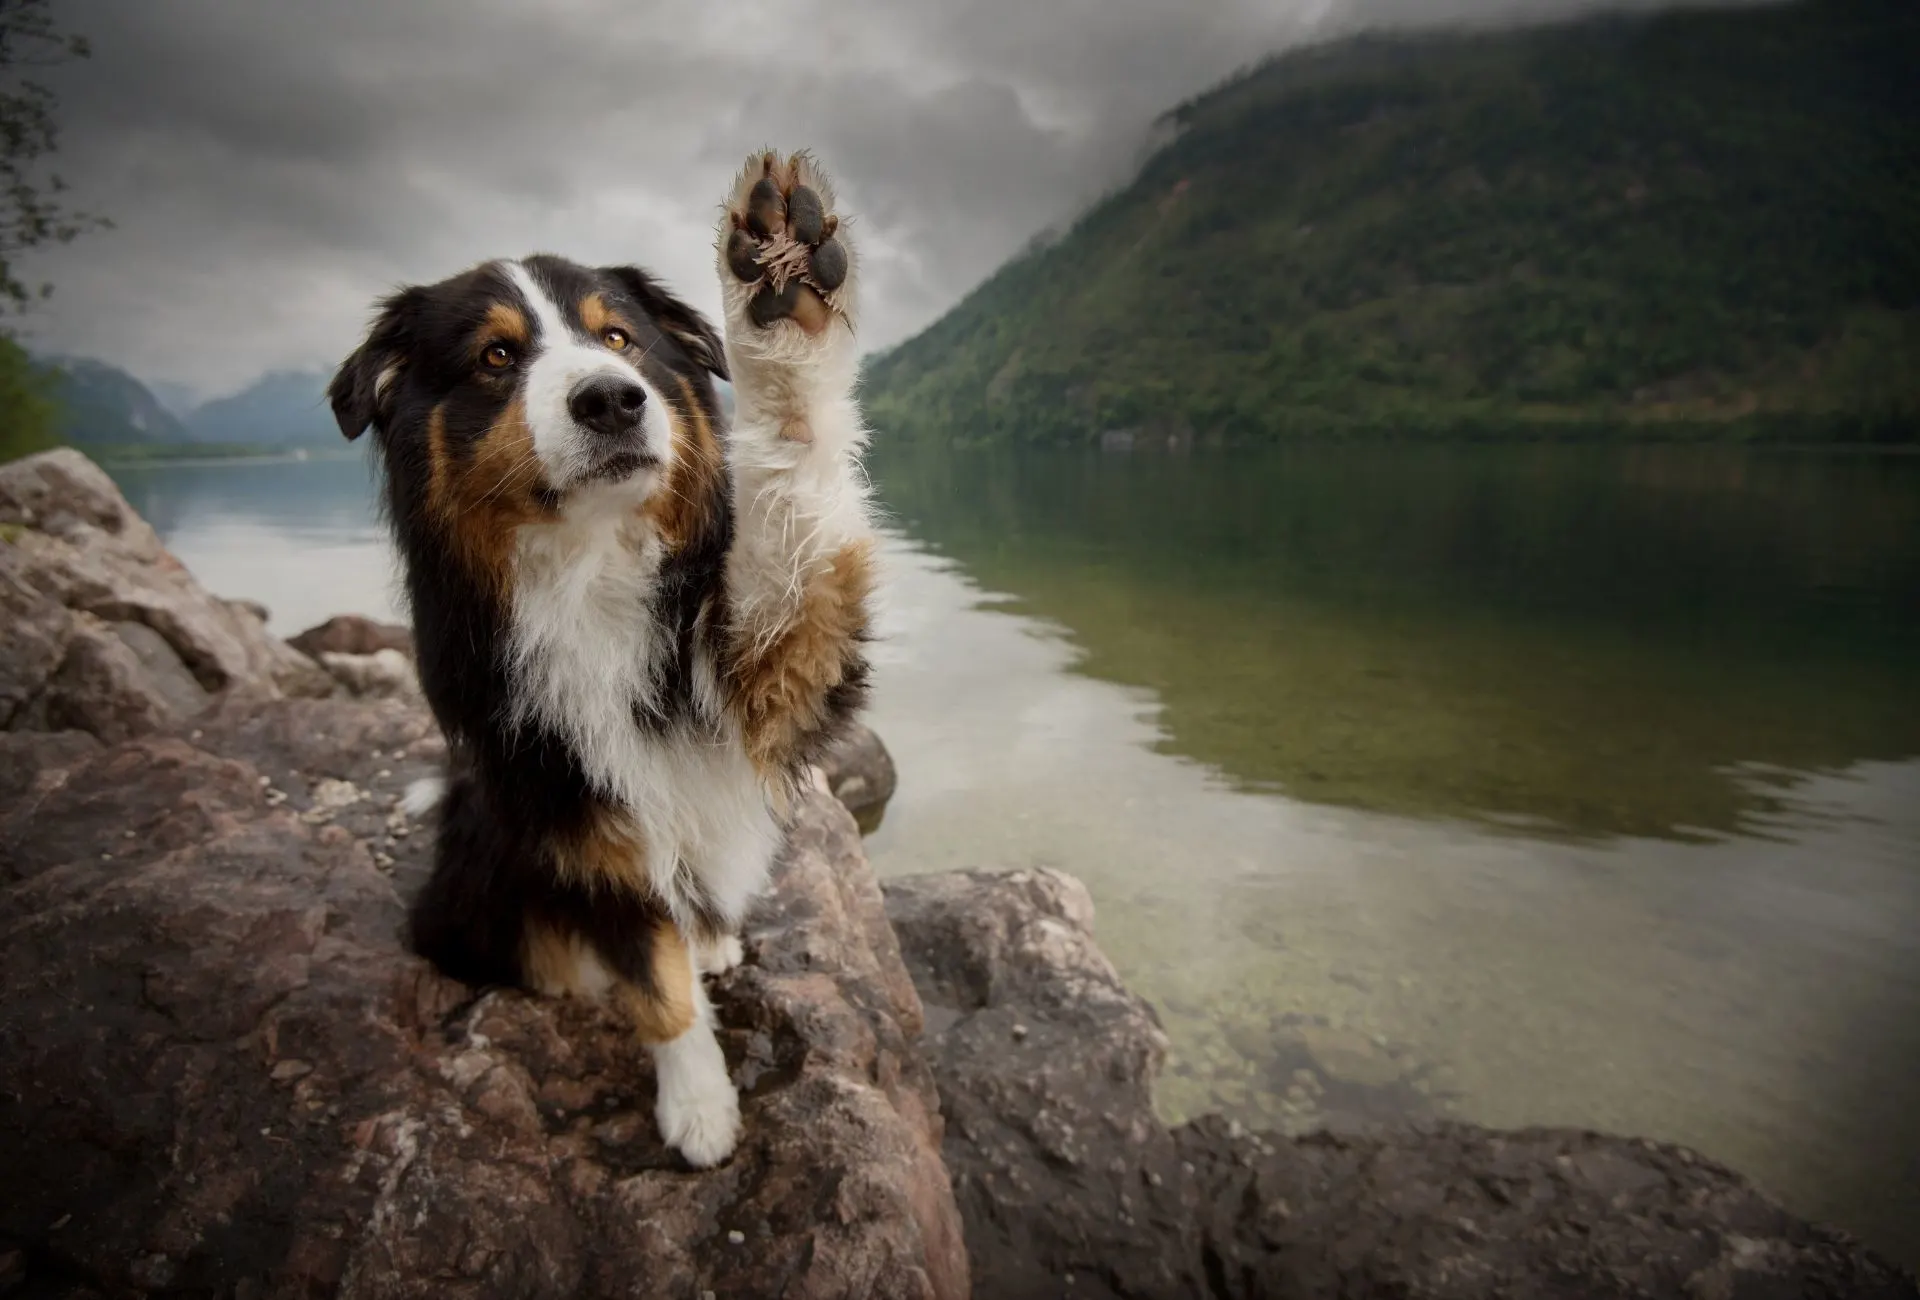 The dog raises the left paw on a rocky surface, which can increase the likelihood of rough paw pads.